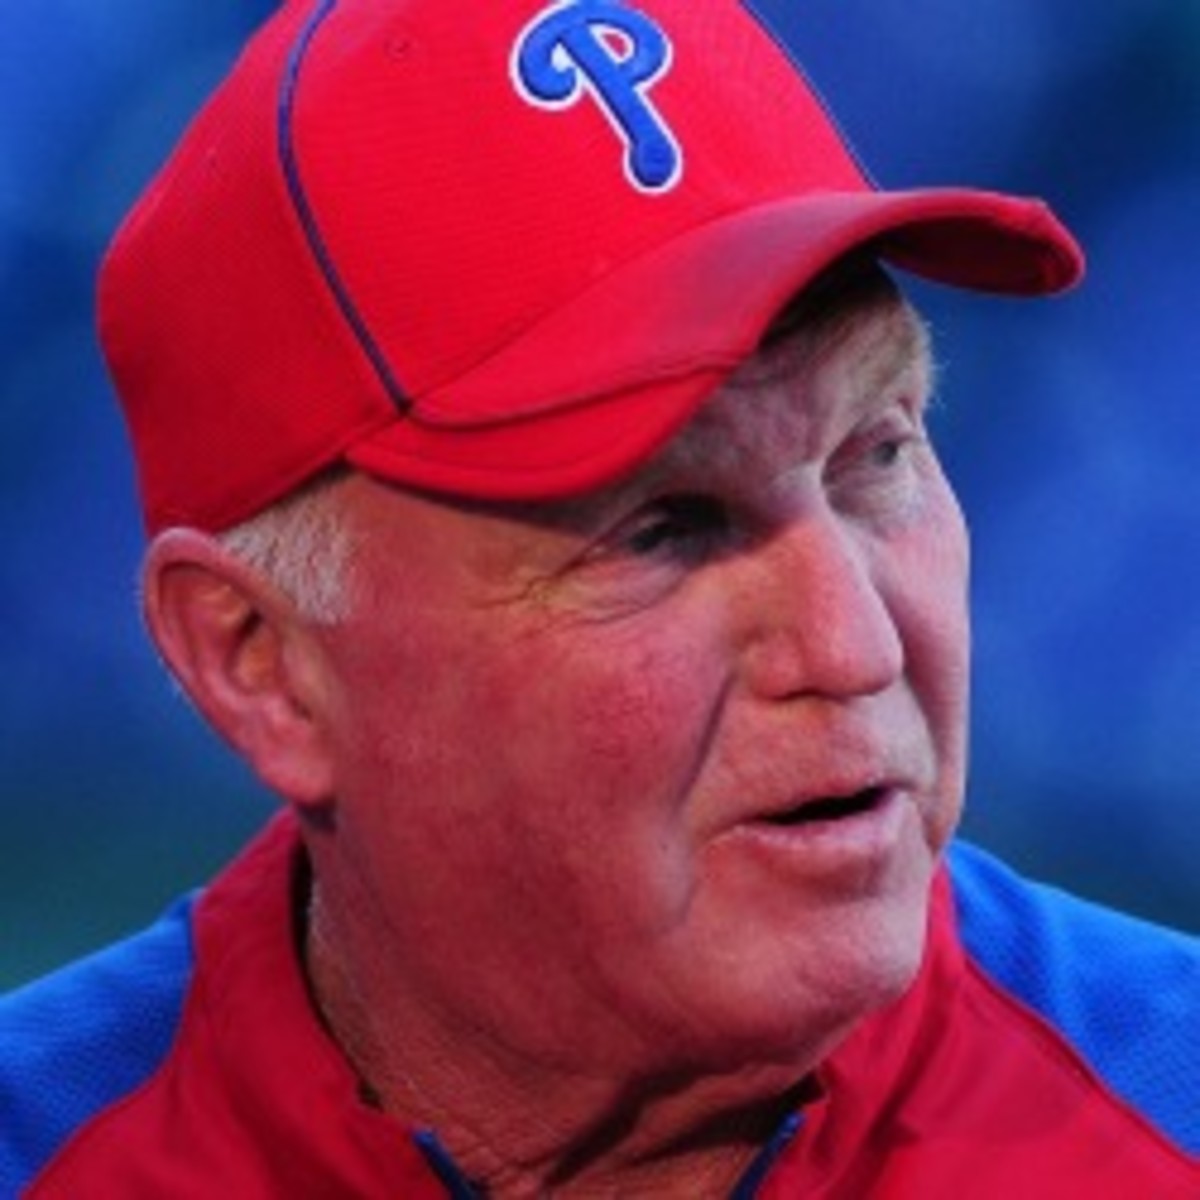 Phillies manager Charlie Manuel signed a two-year contract extension in 2011 that expires after this season. (Jason Arnold/Getty Images)